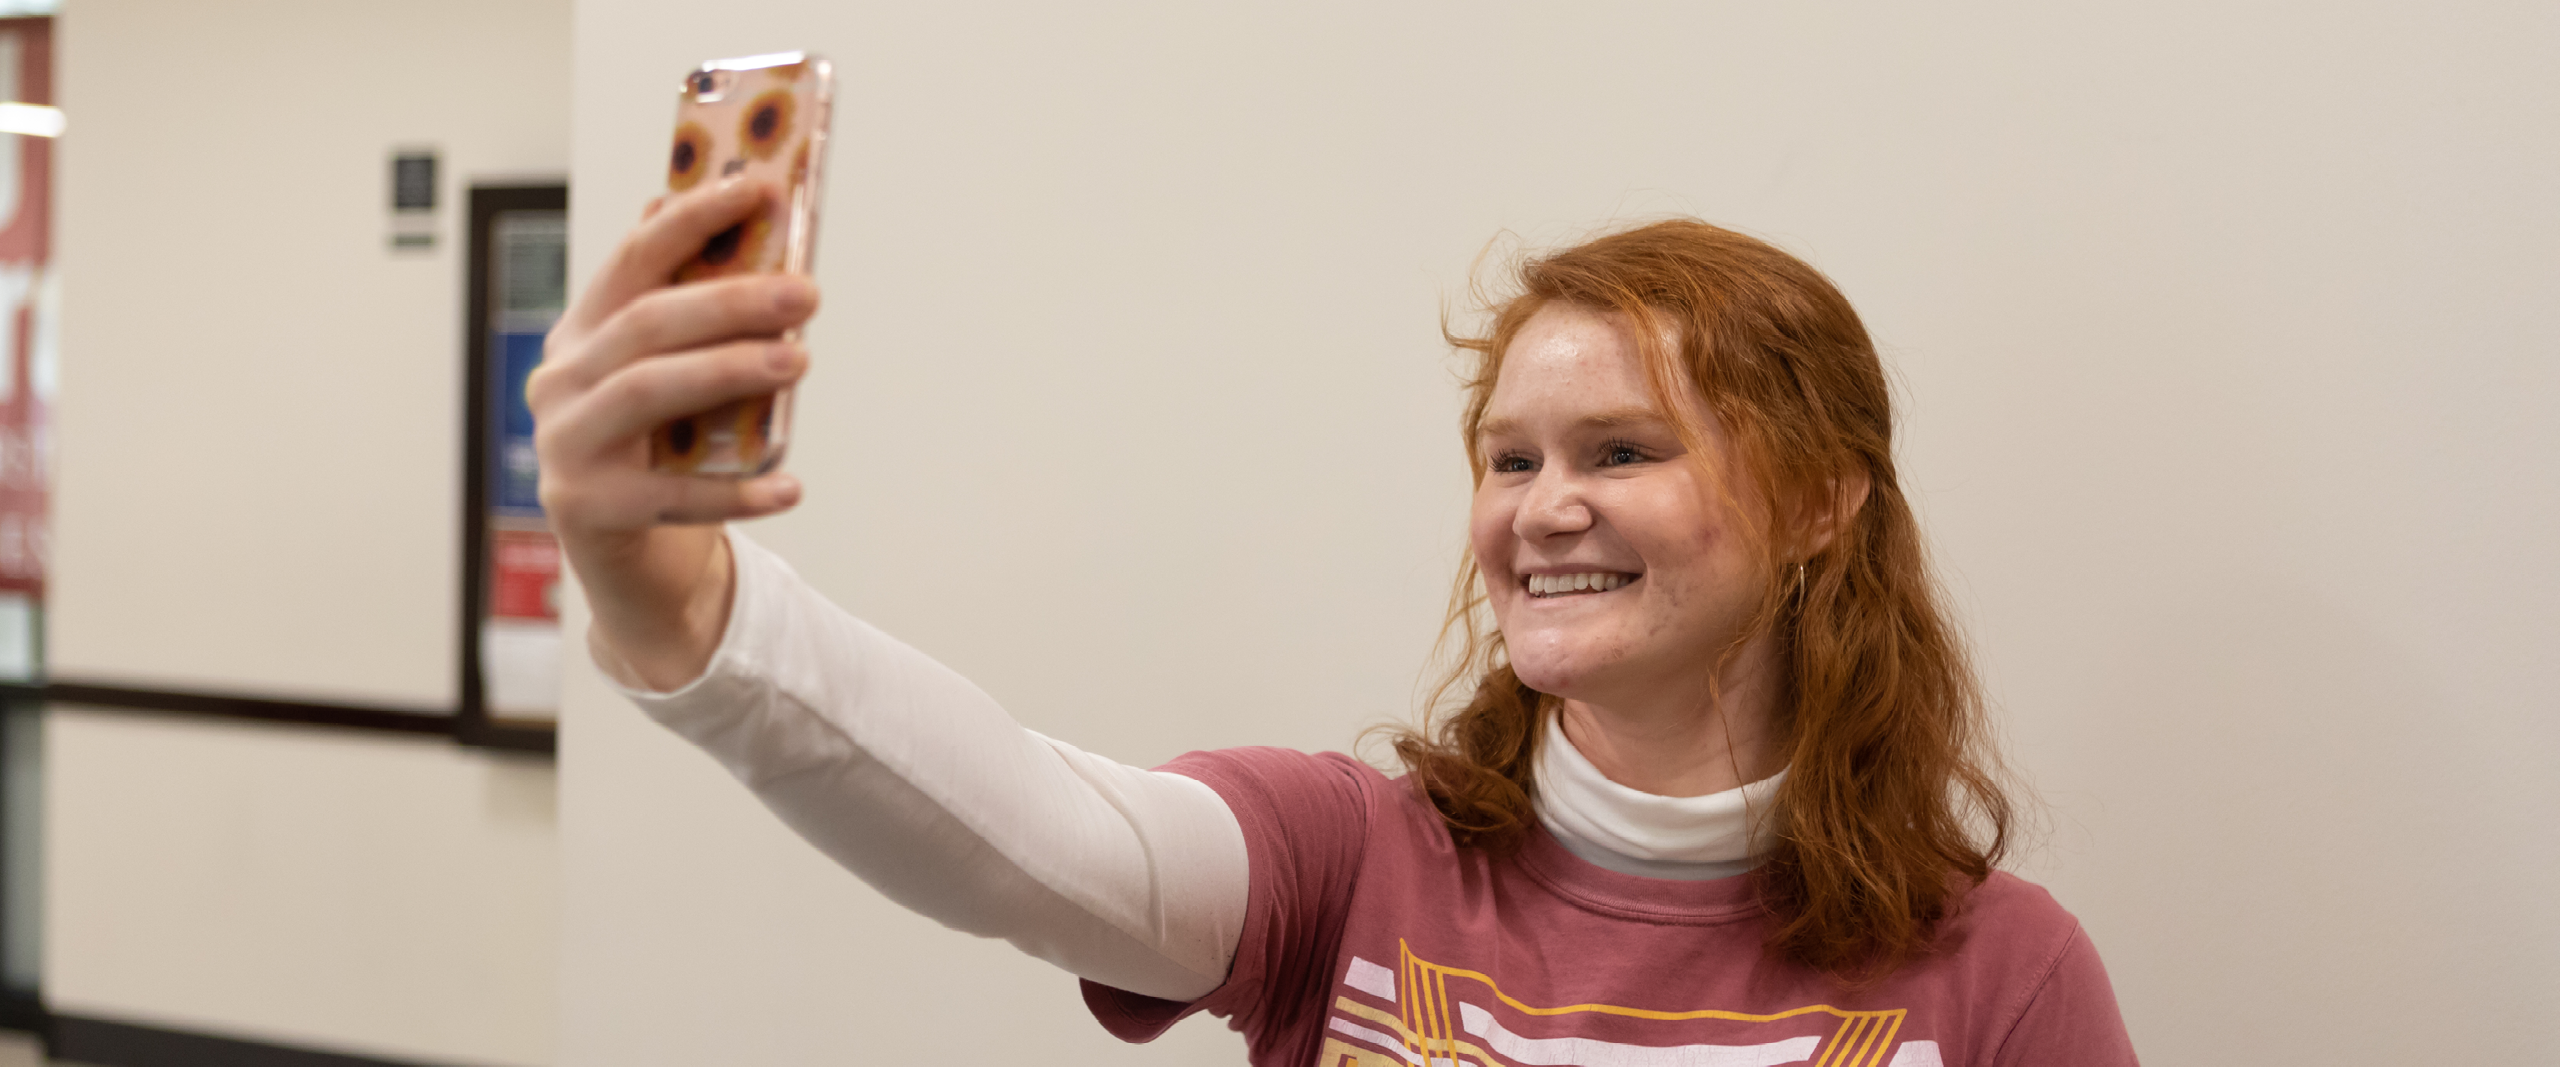 Student taking a selfie in front of a plain white background